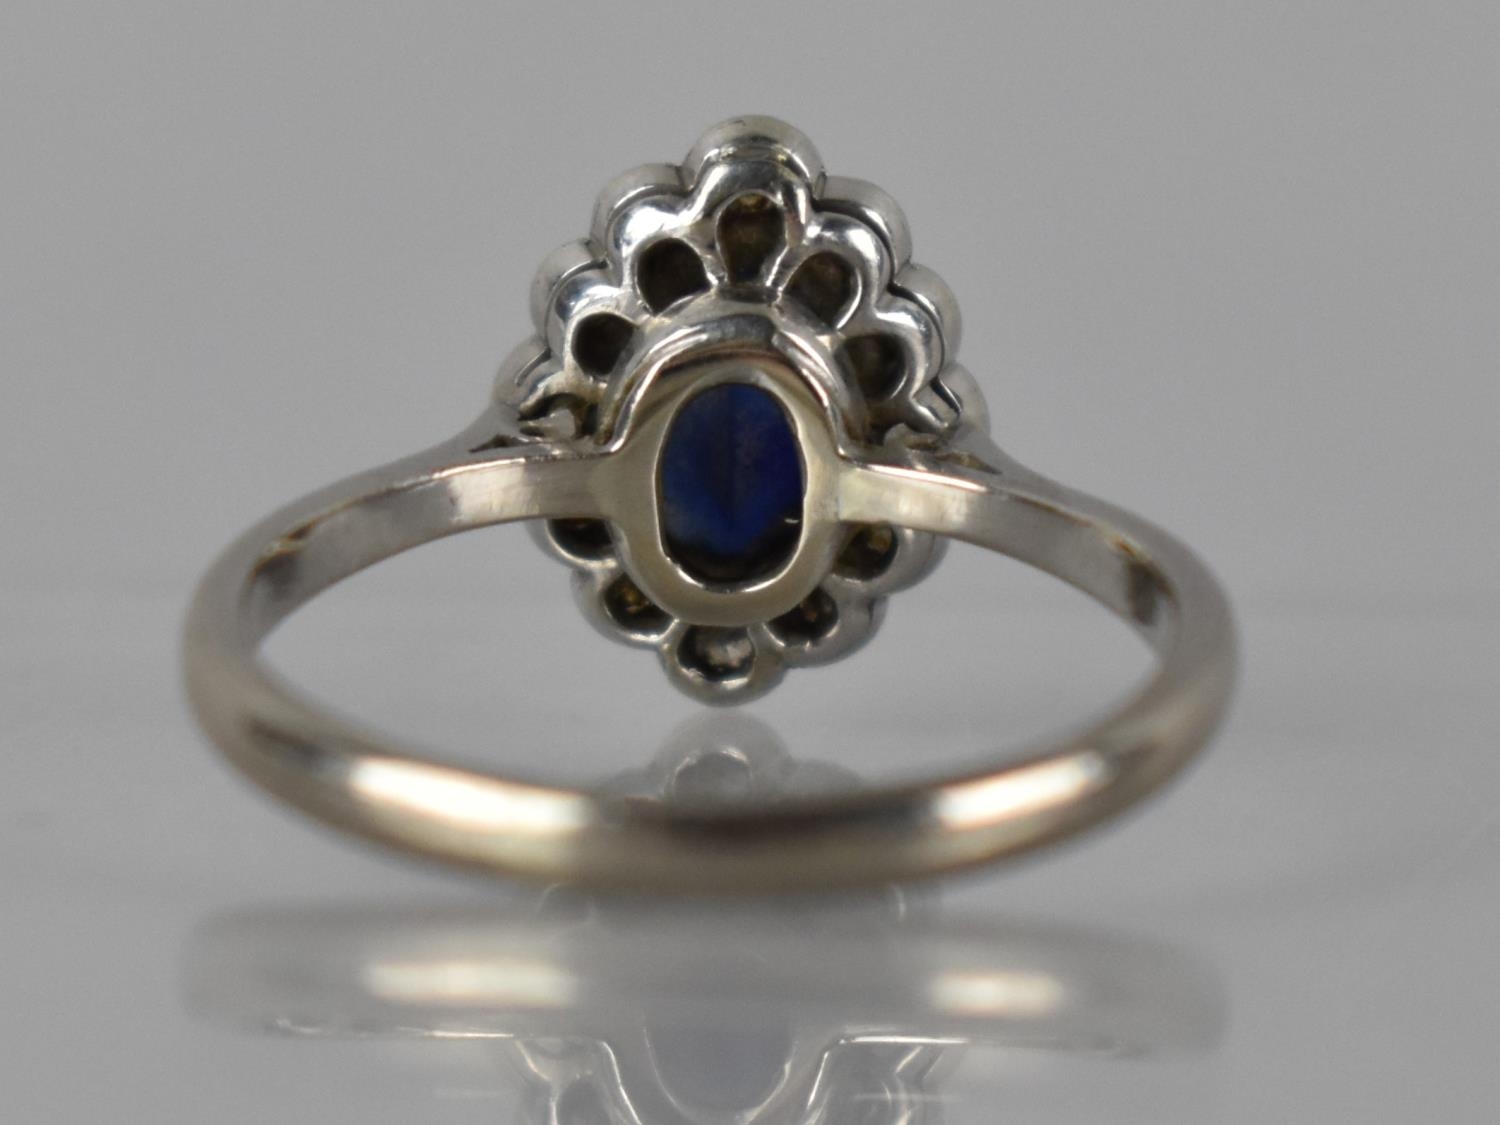 A Sapphire, Diamond and 18ct White Gold Ring, Large Oval Cut Sapphire Measuring 8mm by 5.5mm in - Image 3 of 4